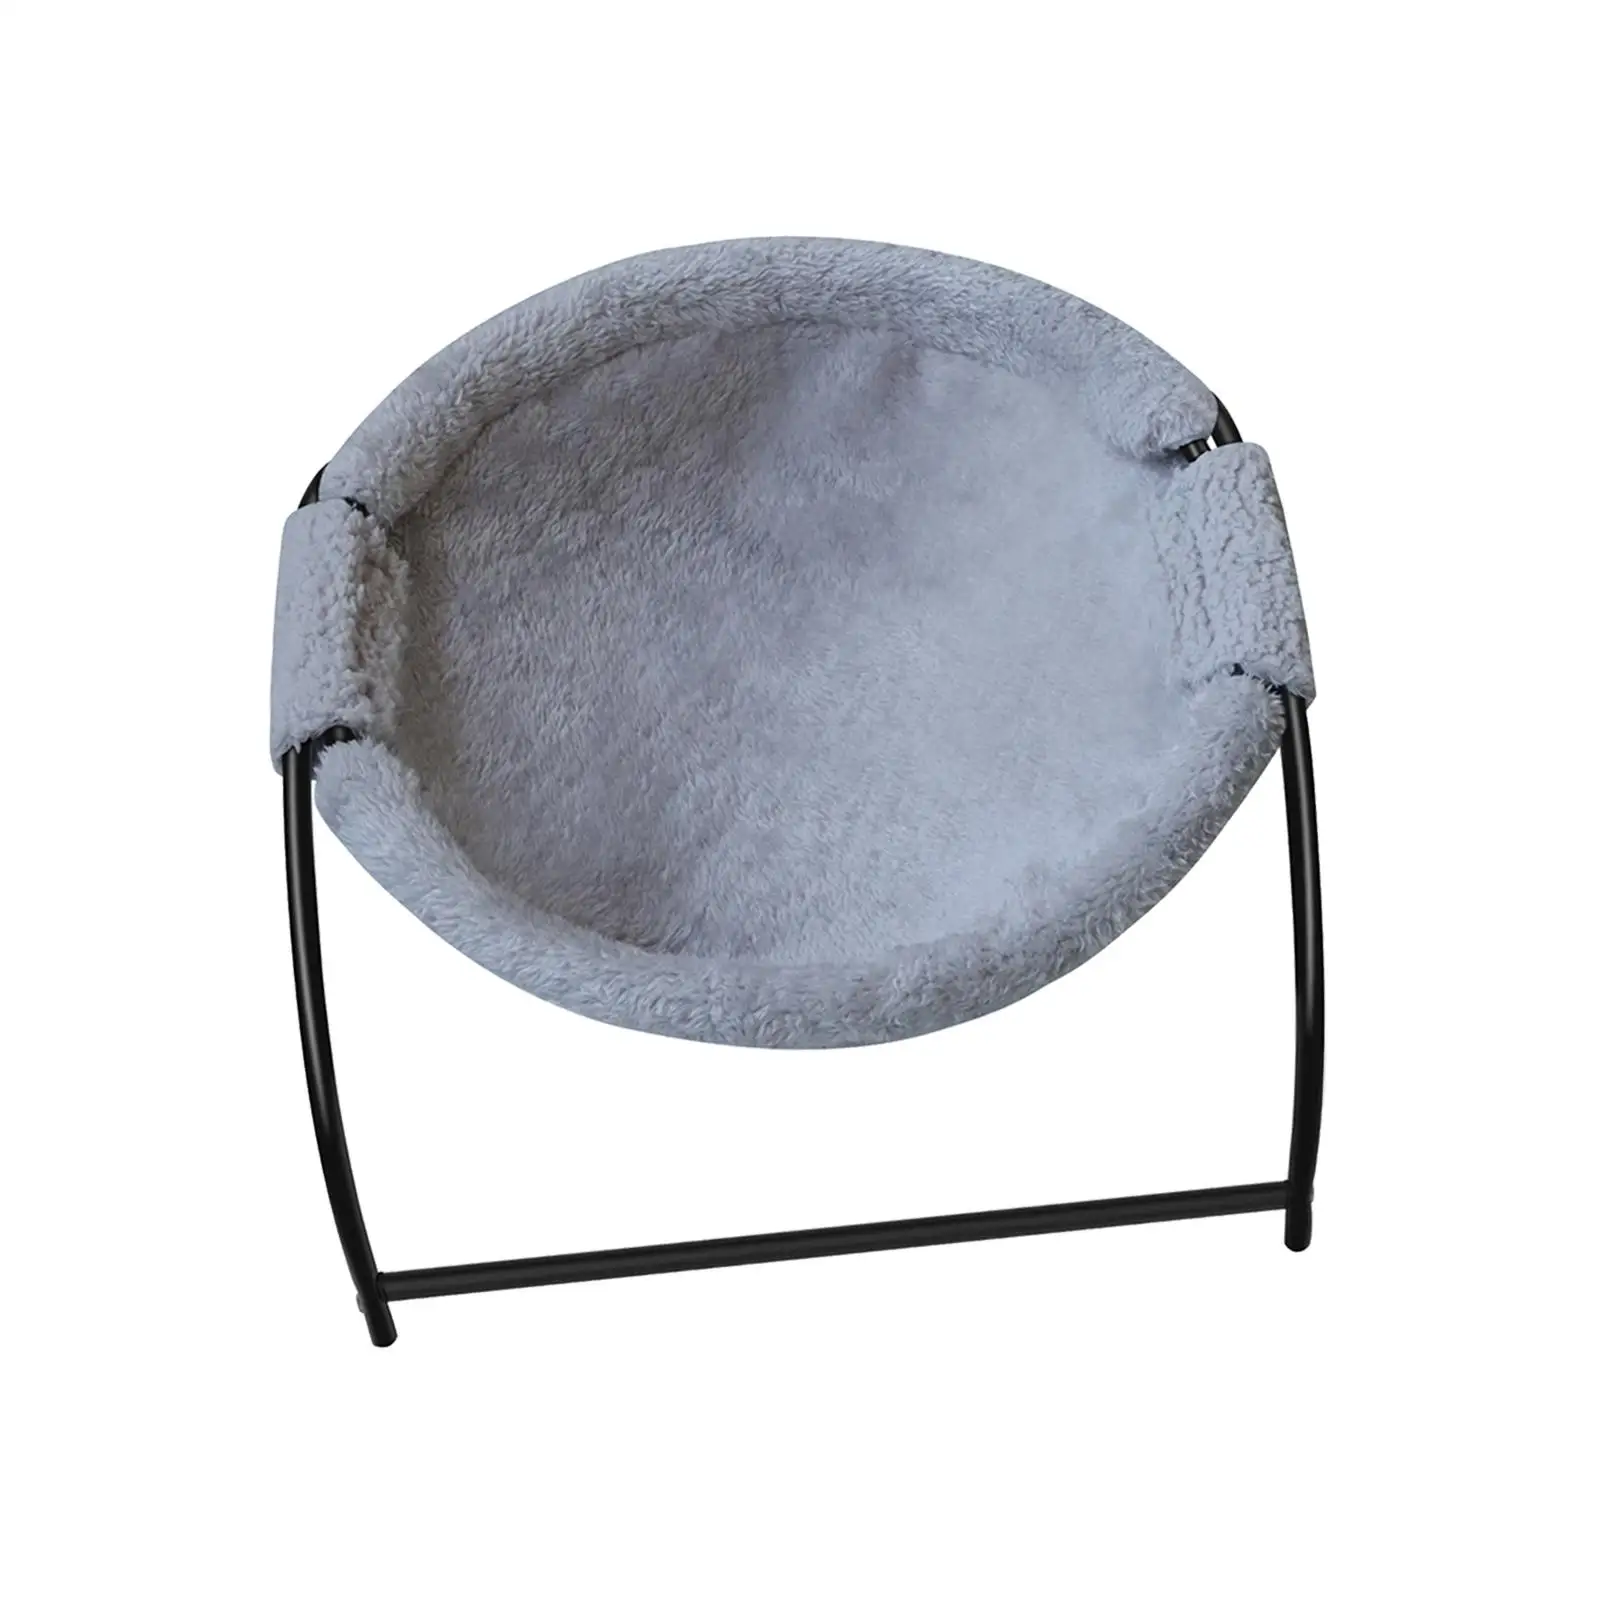   Bed FreeStanding Cat Slee Cat Bed Pet Supplies Detachable Excellent Breathability Easy Assembly Indoors Outdoors